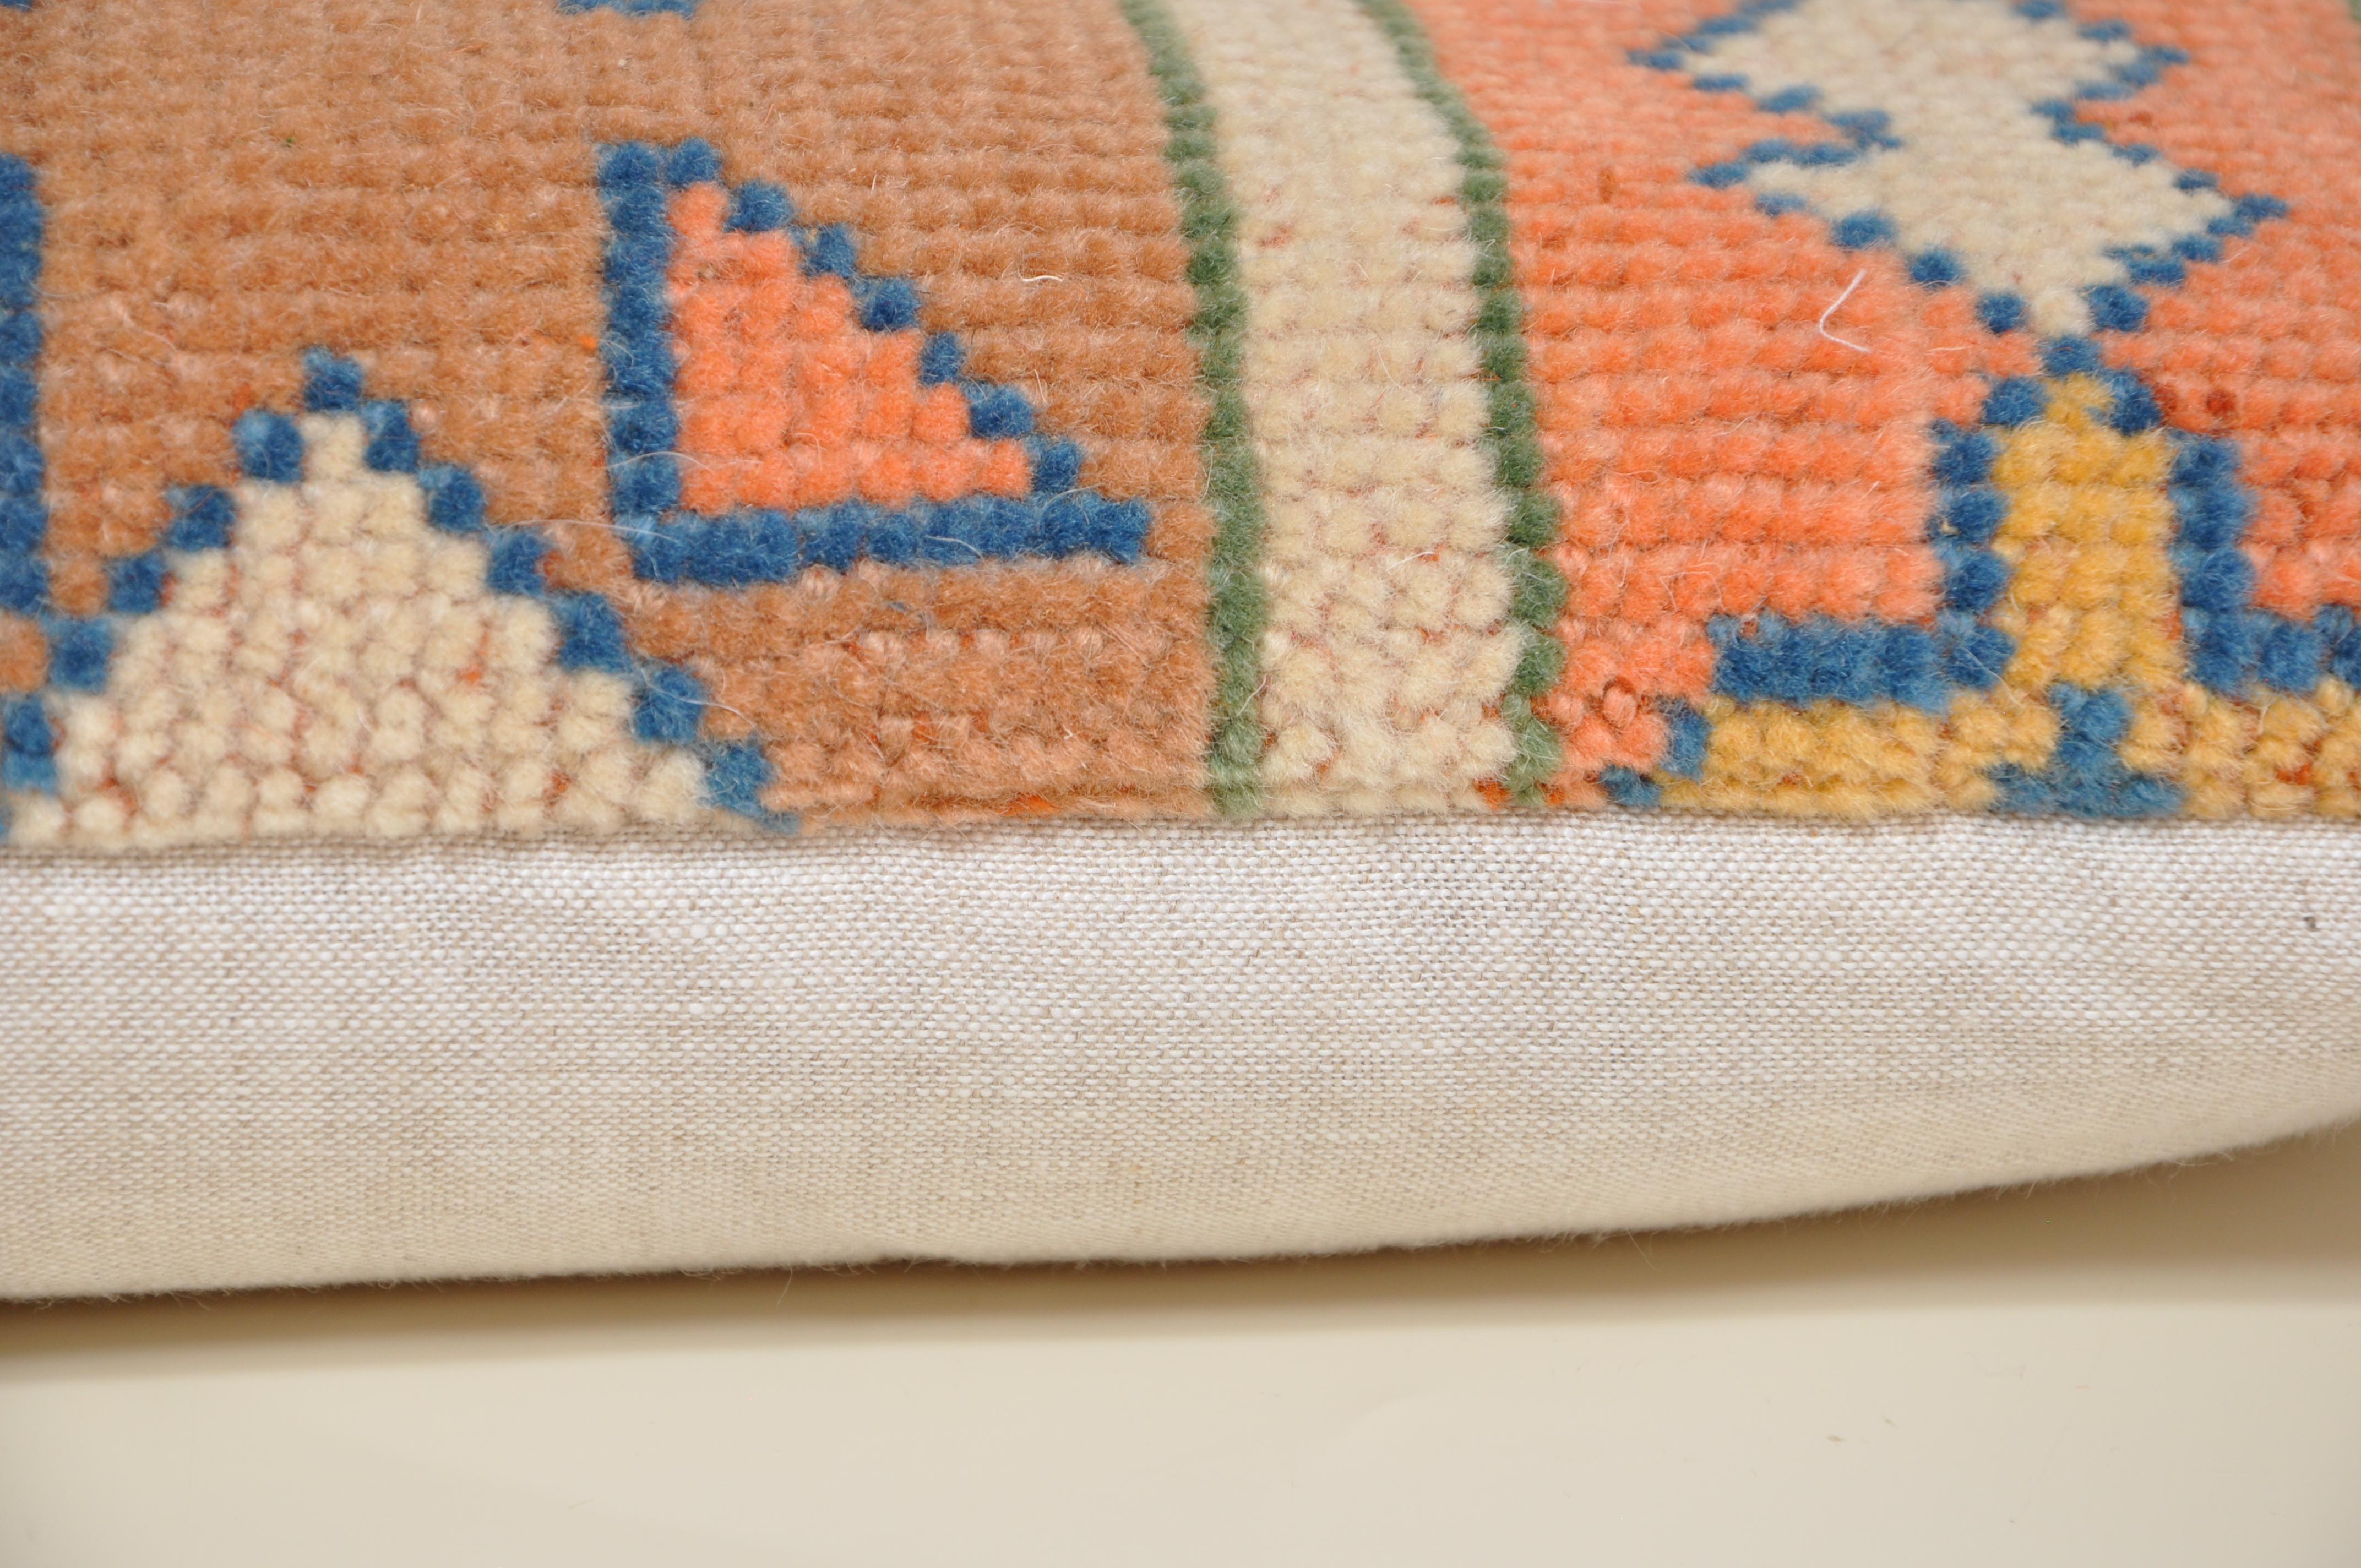 Luxury pillow created from an exquisite piece of vintage kilim rug combined with Irish Linen by Irish designer Katie Larmour. Unique and one-of-a-kind. 

Each cushion is constructed in Ireland.
Filled with a new, custom-made, plush duck feather